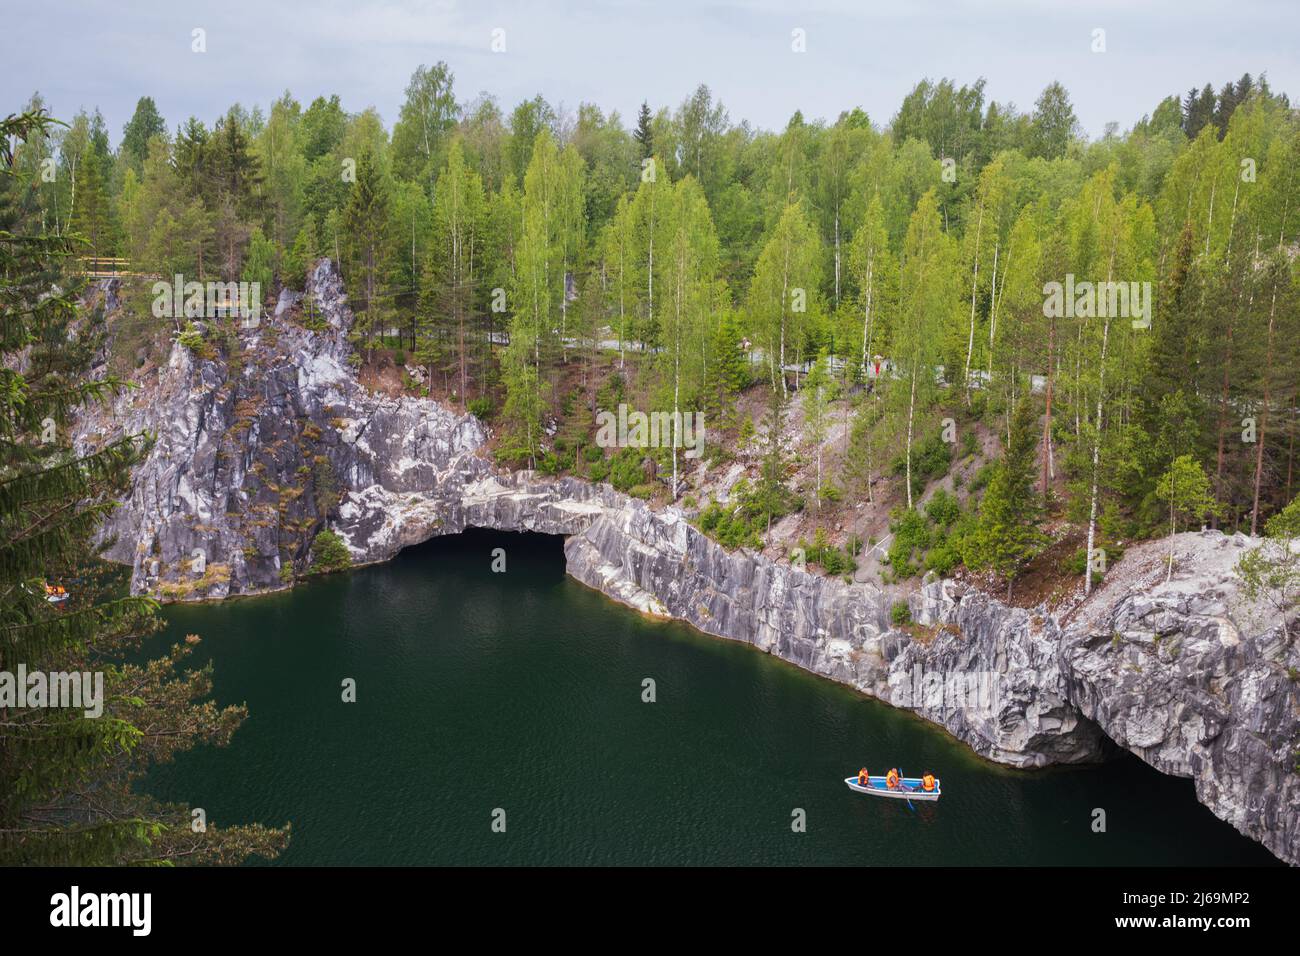 Karelian landscape with tourists in boat sailing the former marble quarry filled with groundwater. Ruskeala, Russia Stock Photo